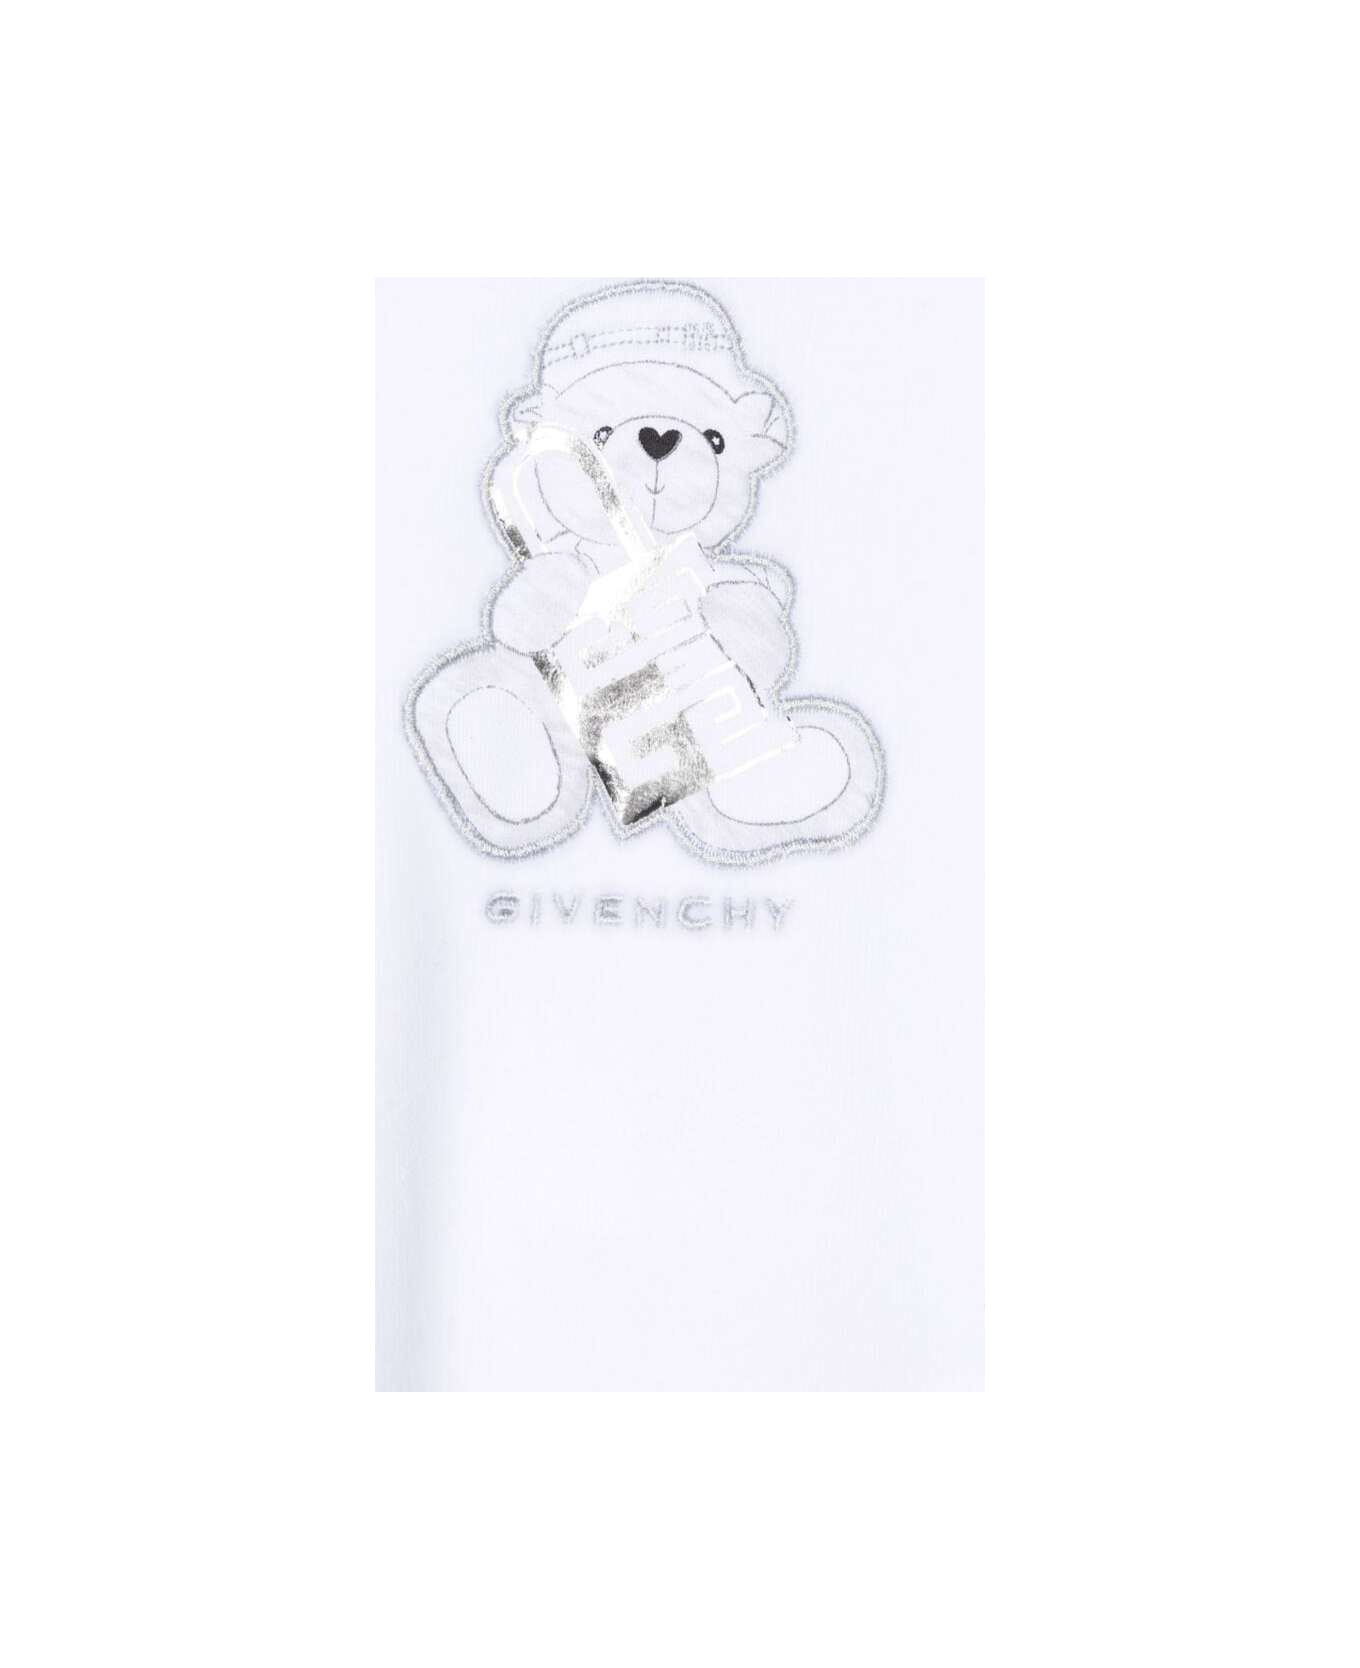 Givenchy Set Peluches, Clutch And Suit - White